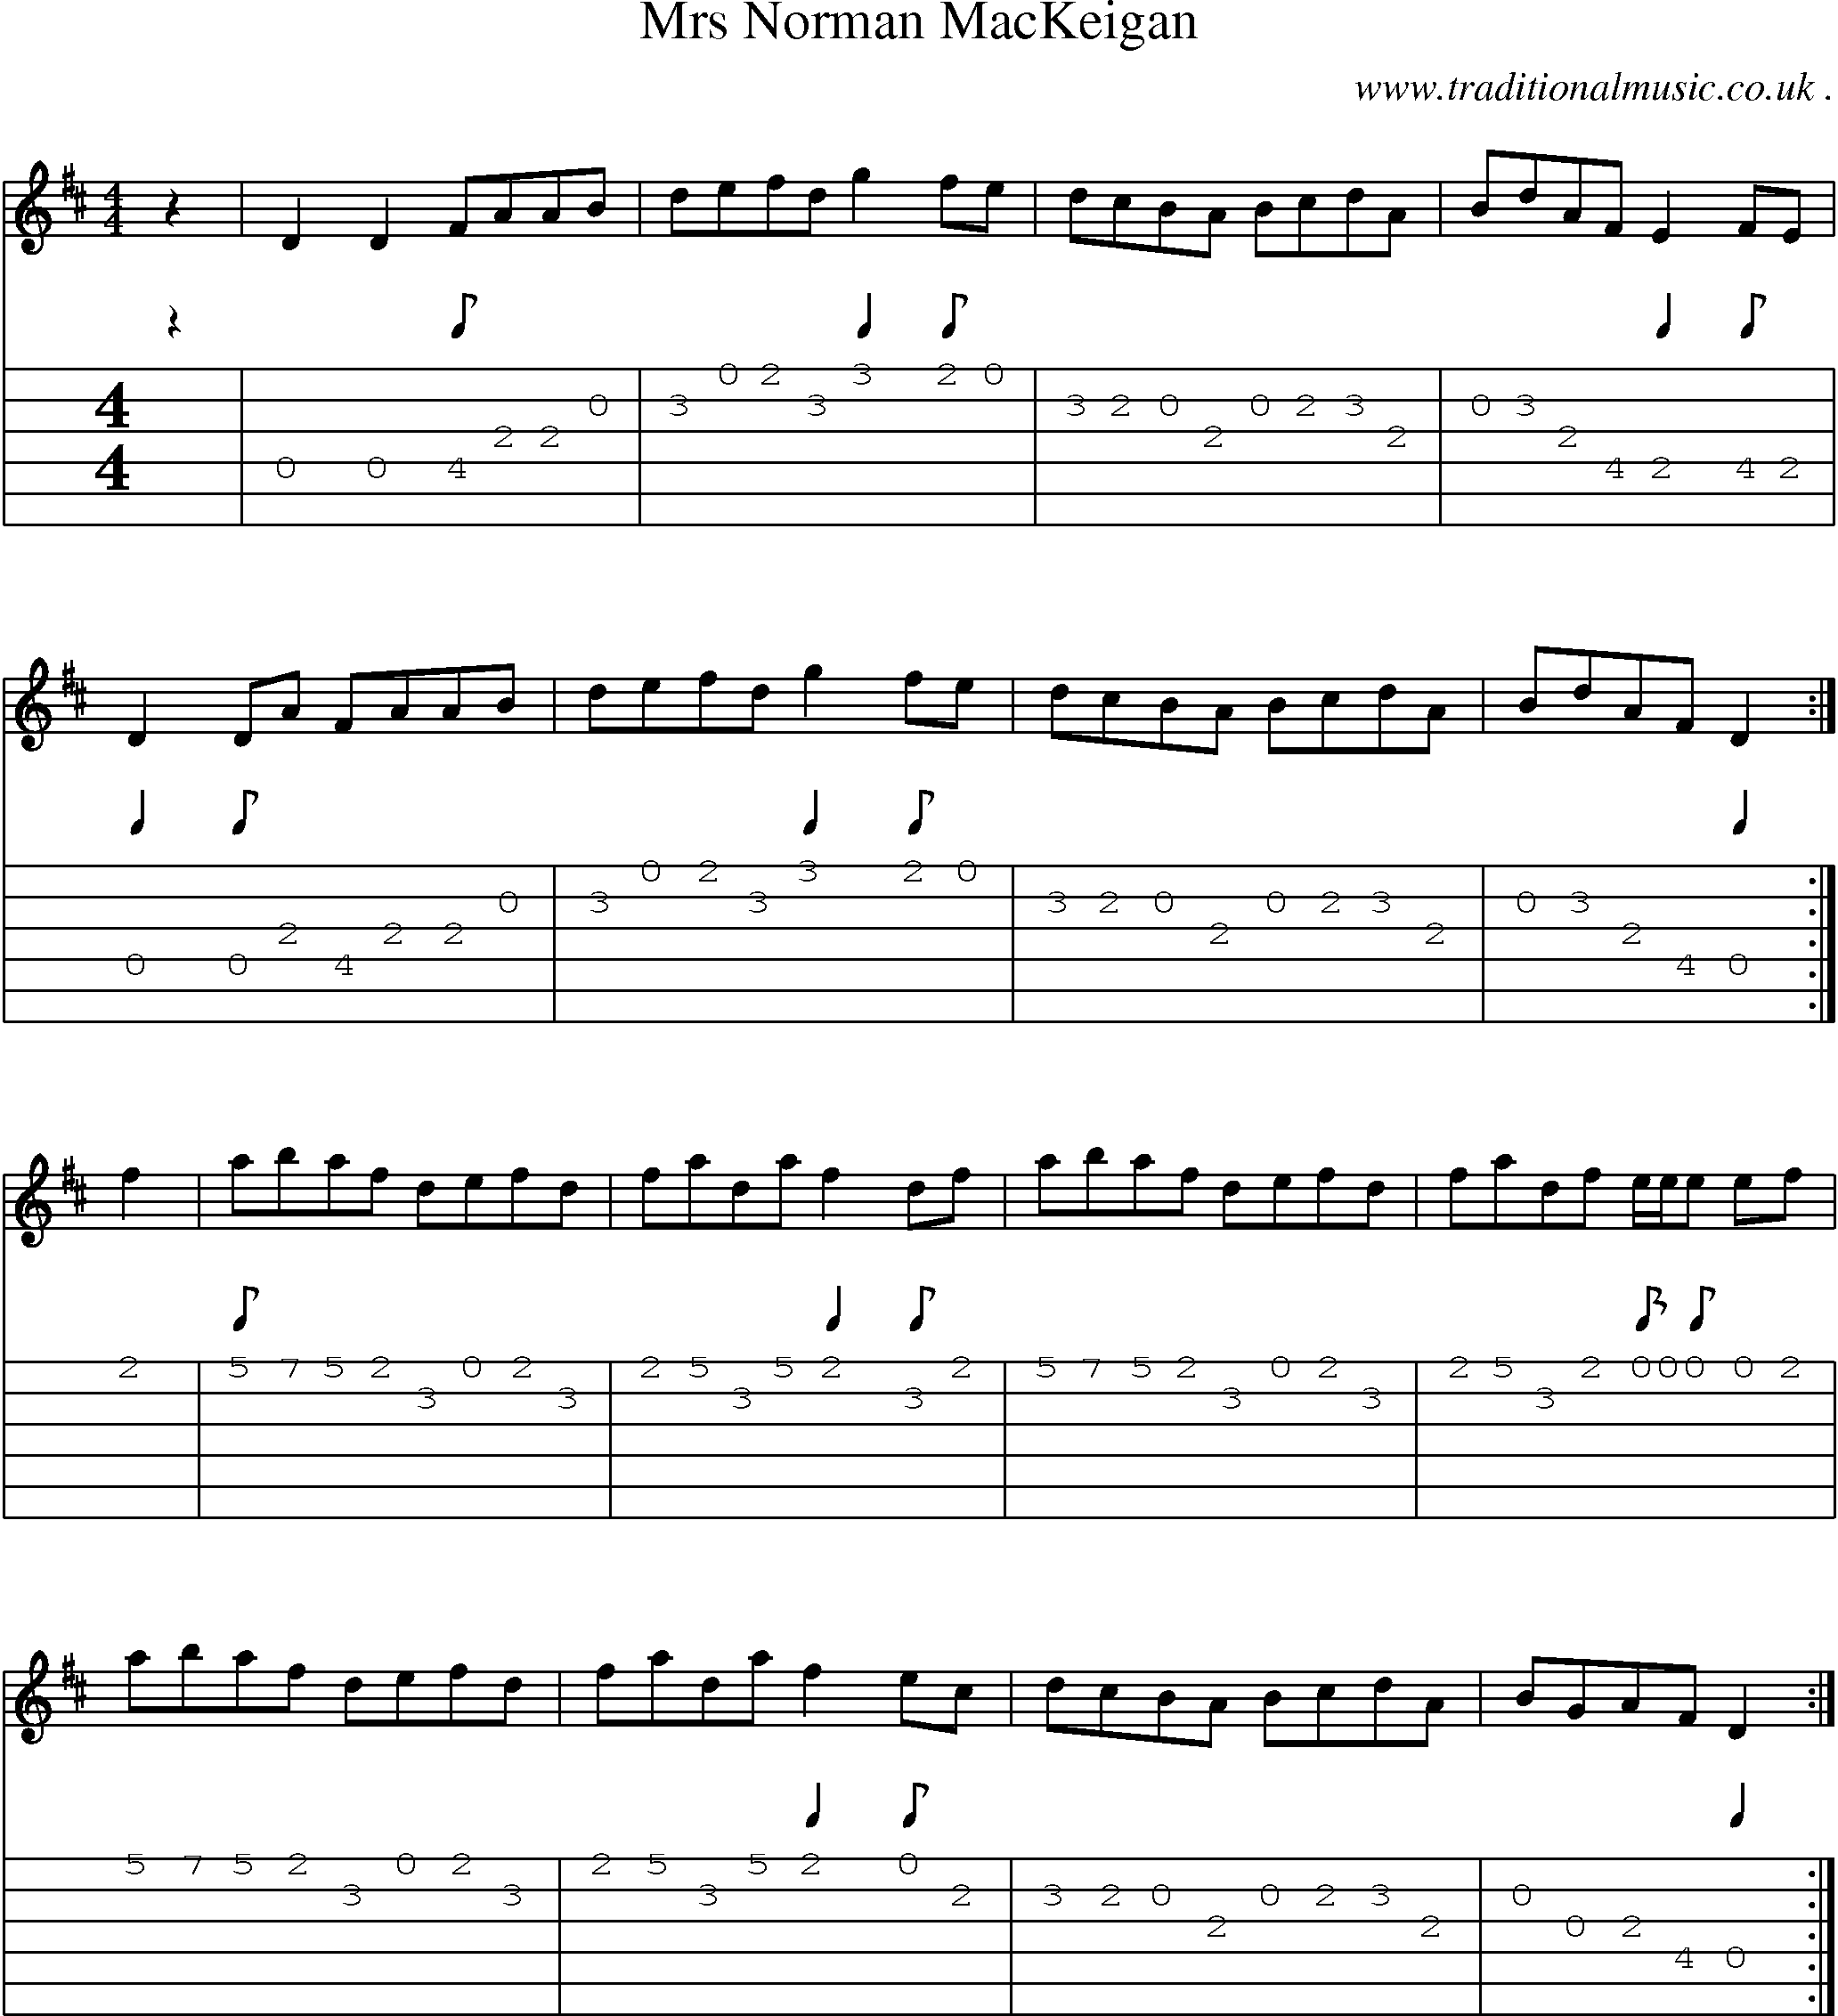 Sheet-music  score, Chords and Guitar Tabs for Mrs Norman Mackeigan